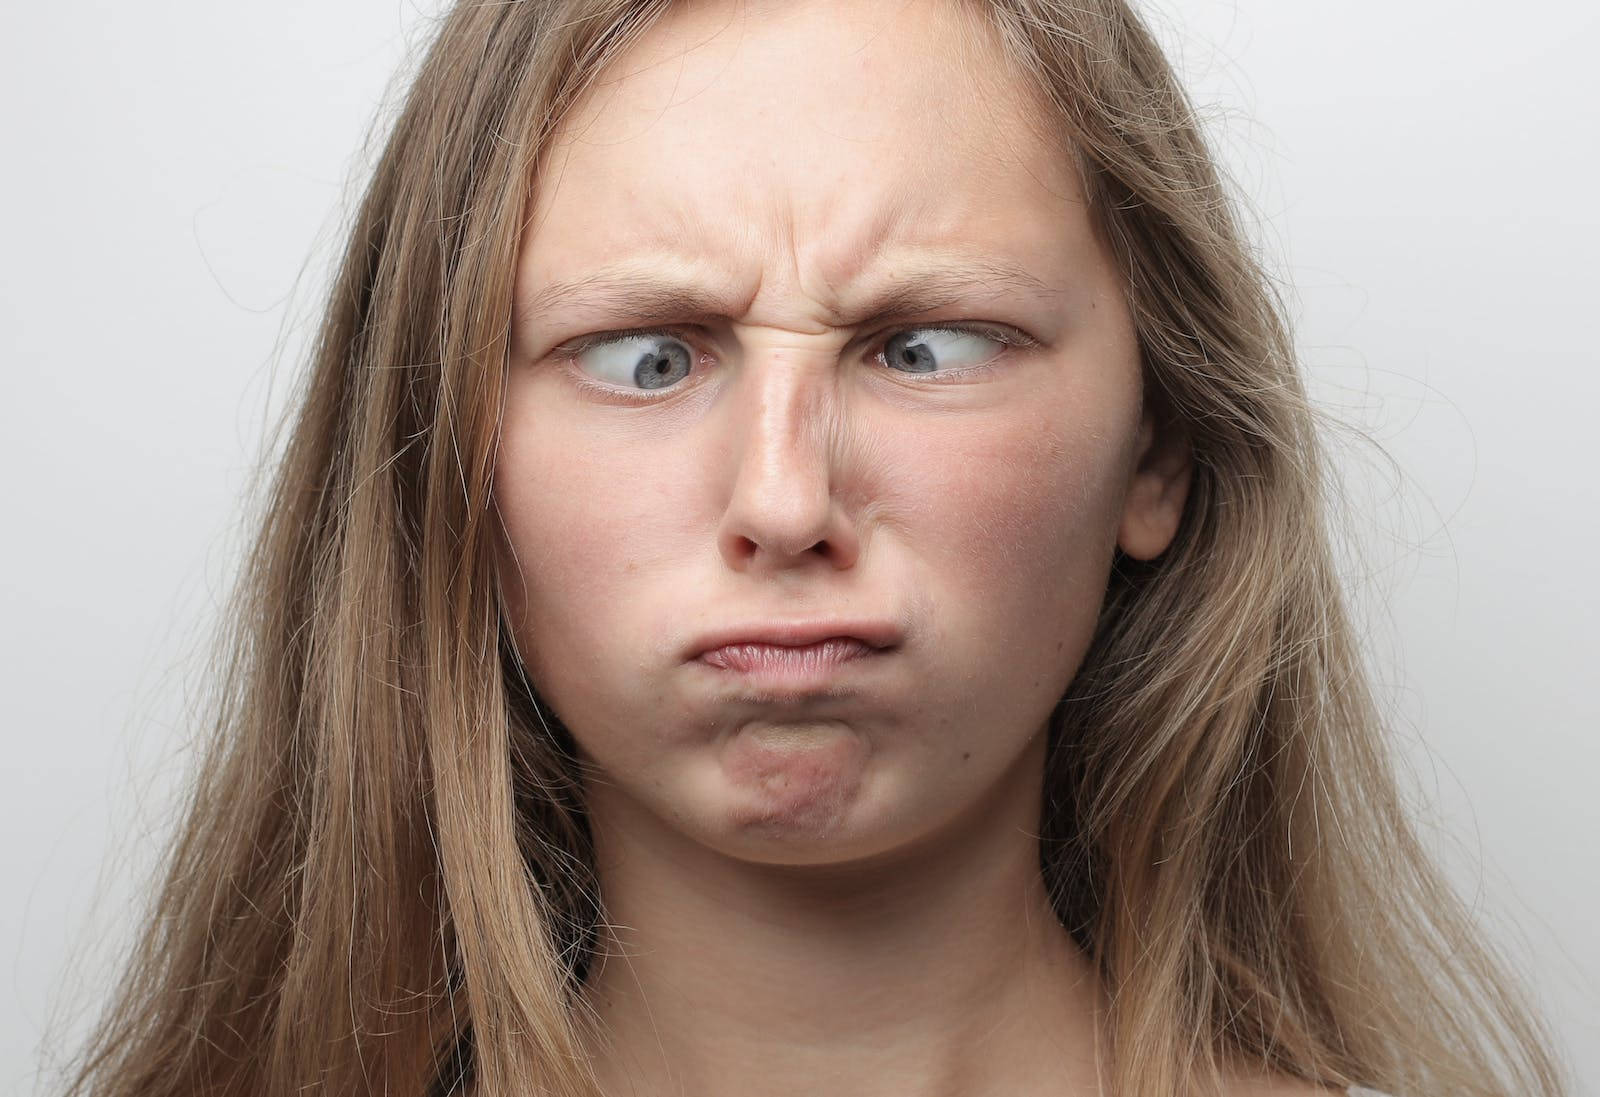 Furious Young Woman With Scrunched Nose